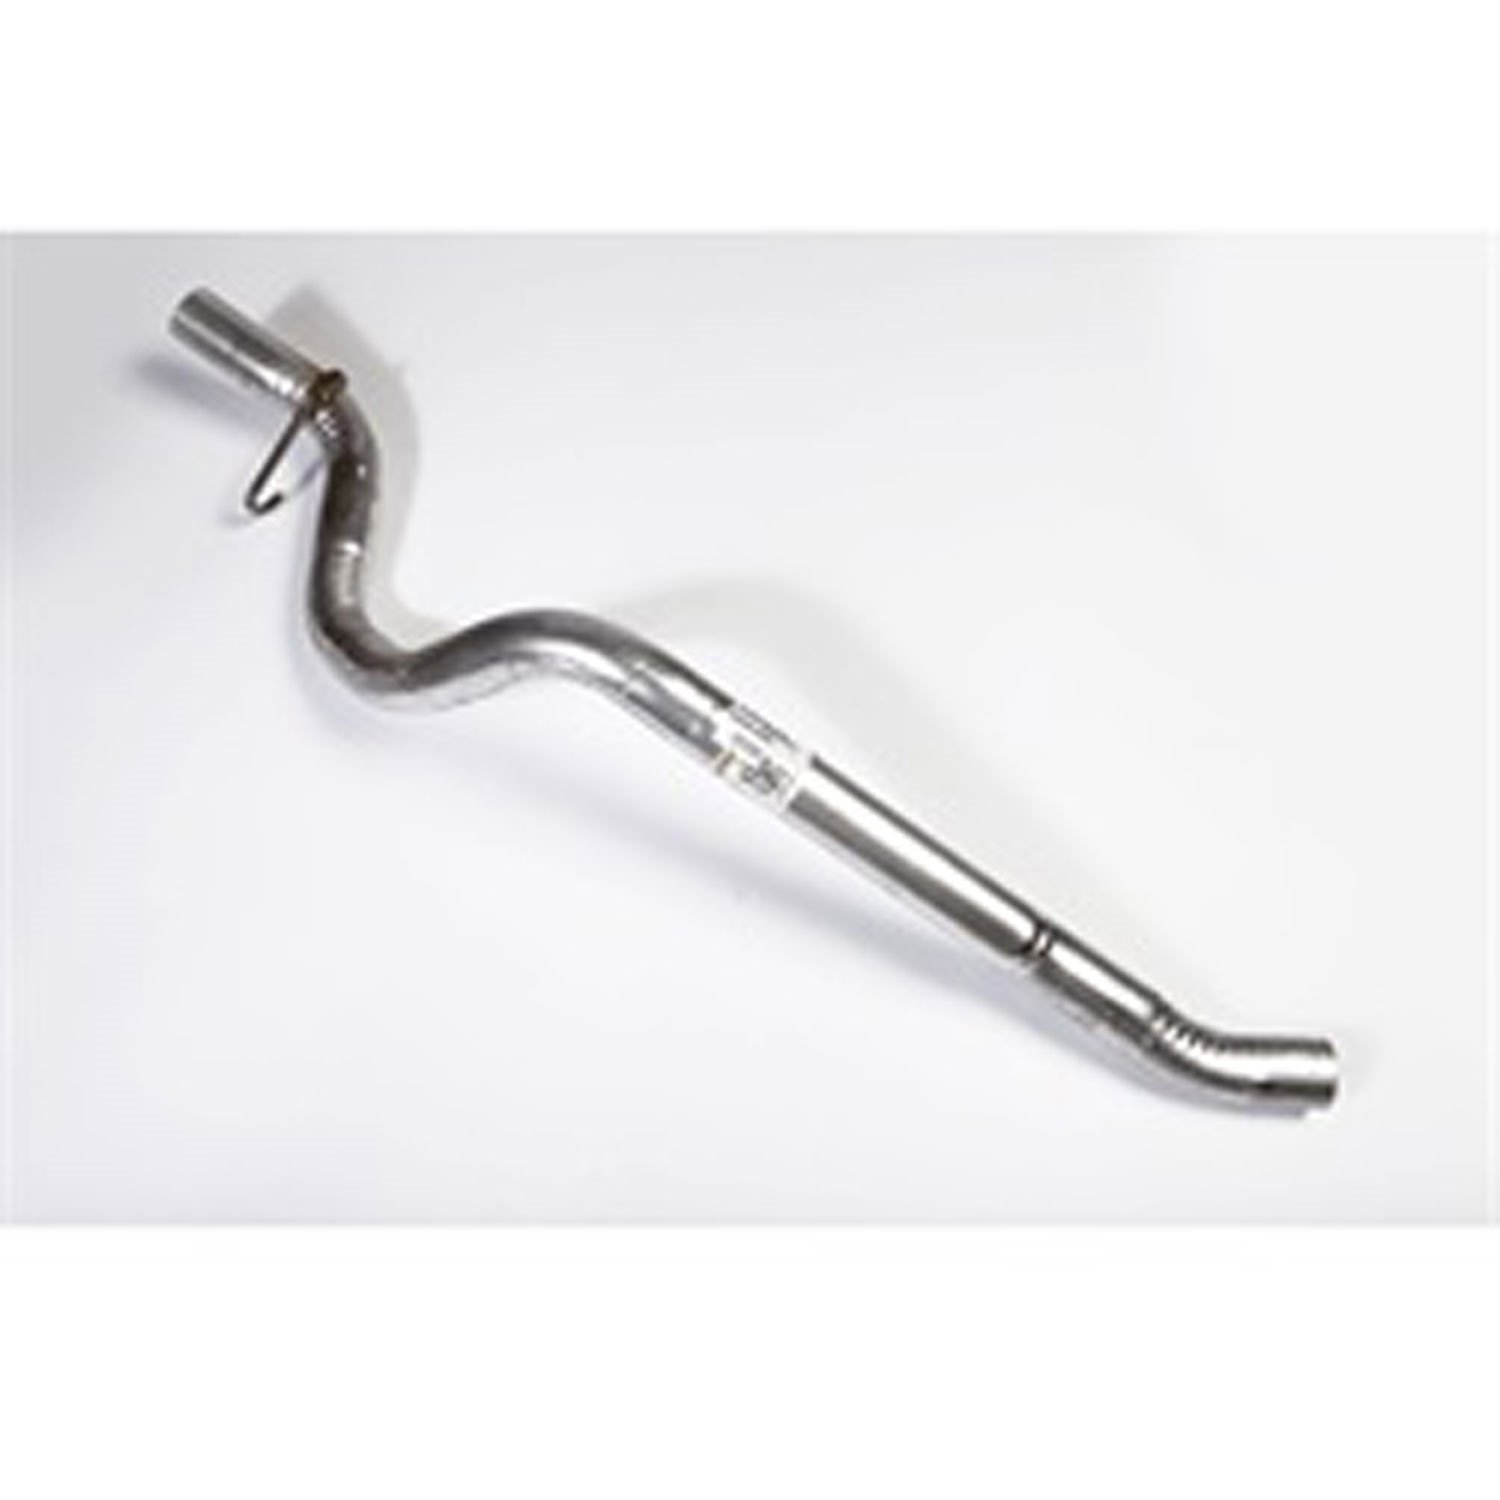 Replacement tailpipe from Omix-ADA, Fits 93-96 Jeep Cherokee XJ with a 2.5 liter or 4.0 liter engine.